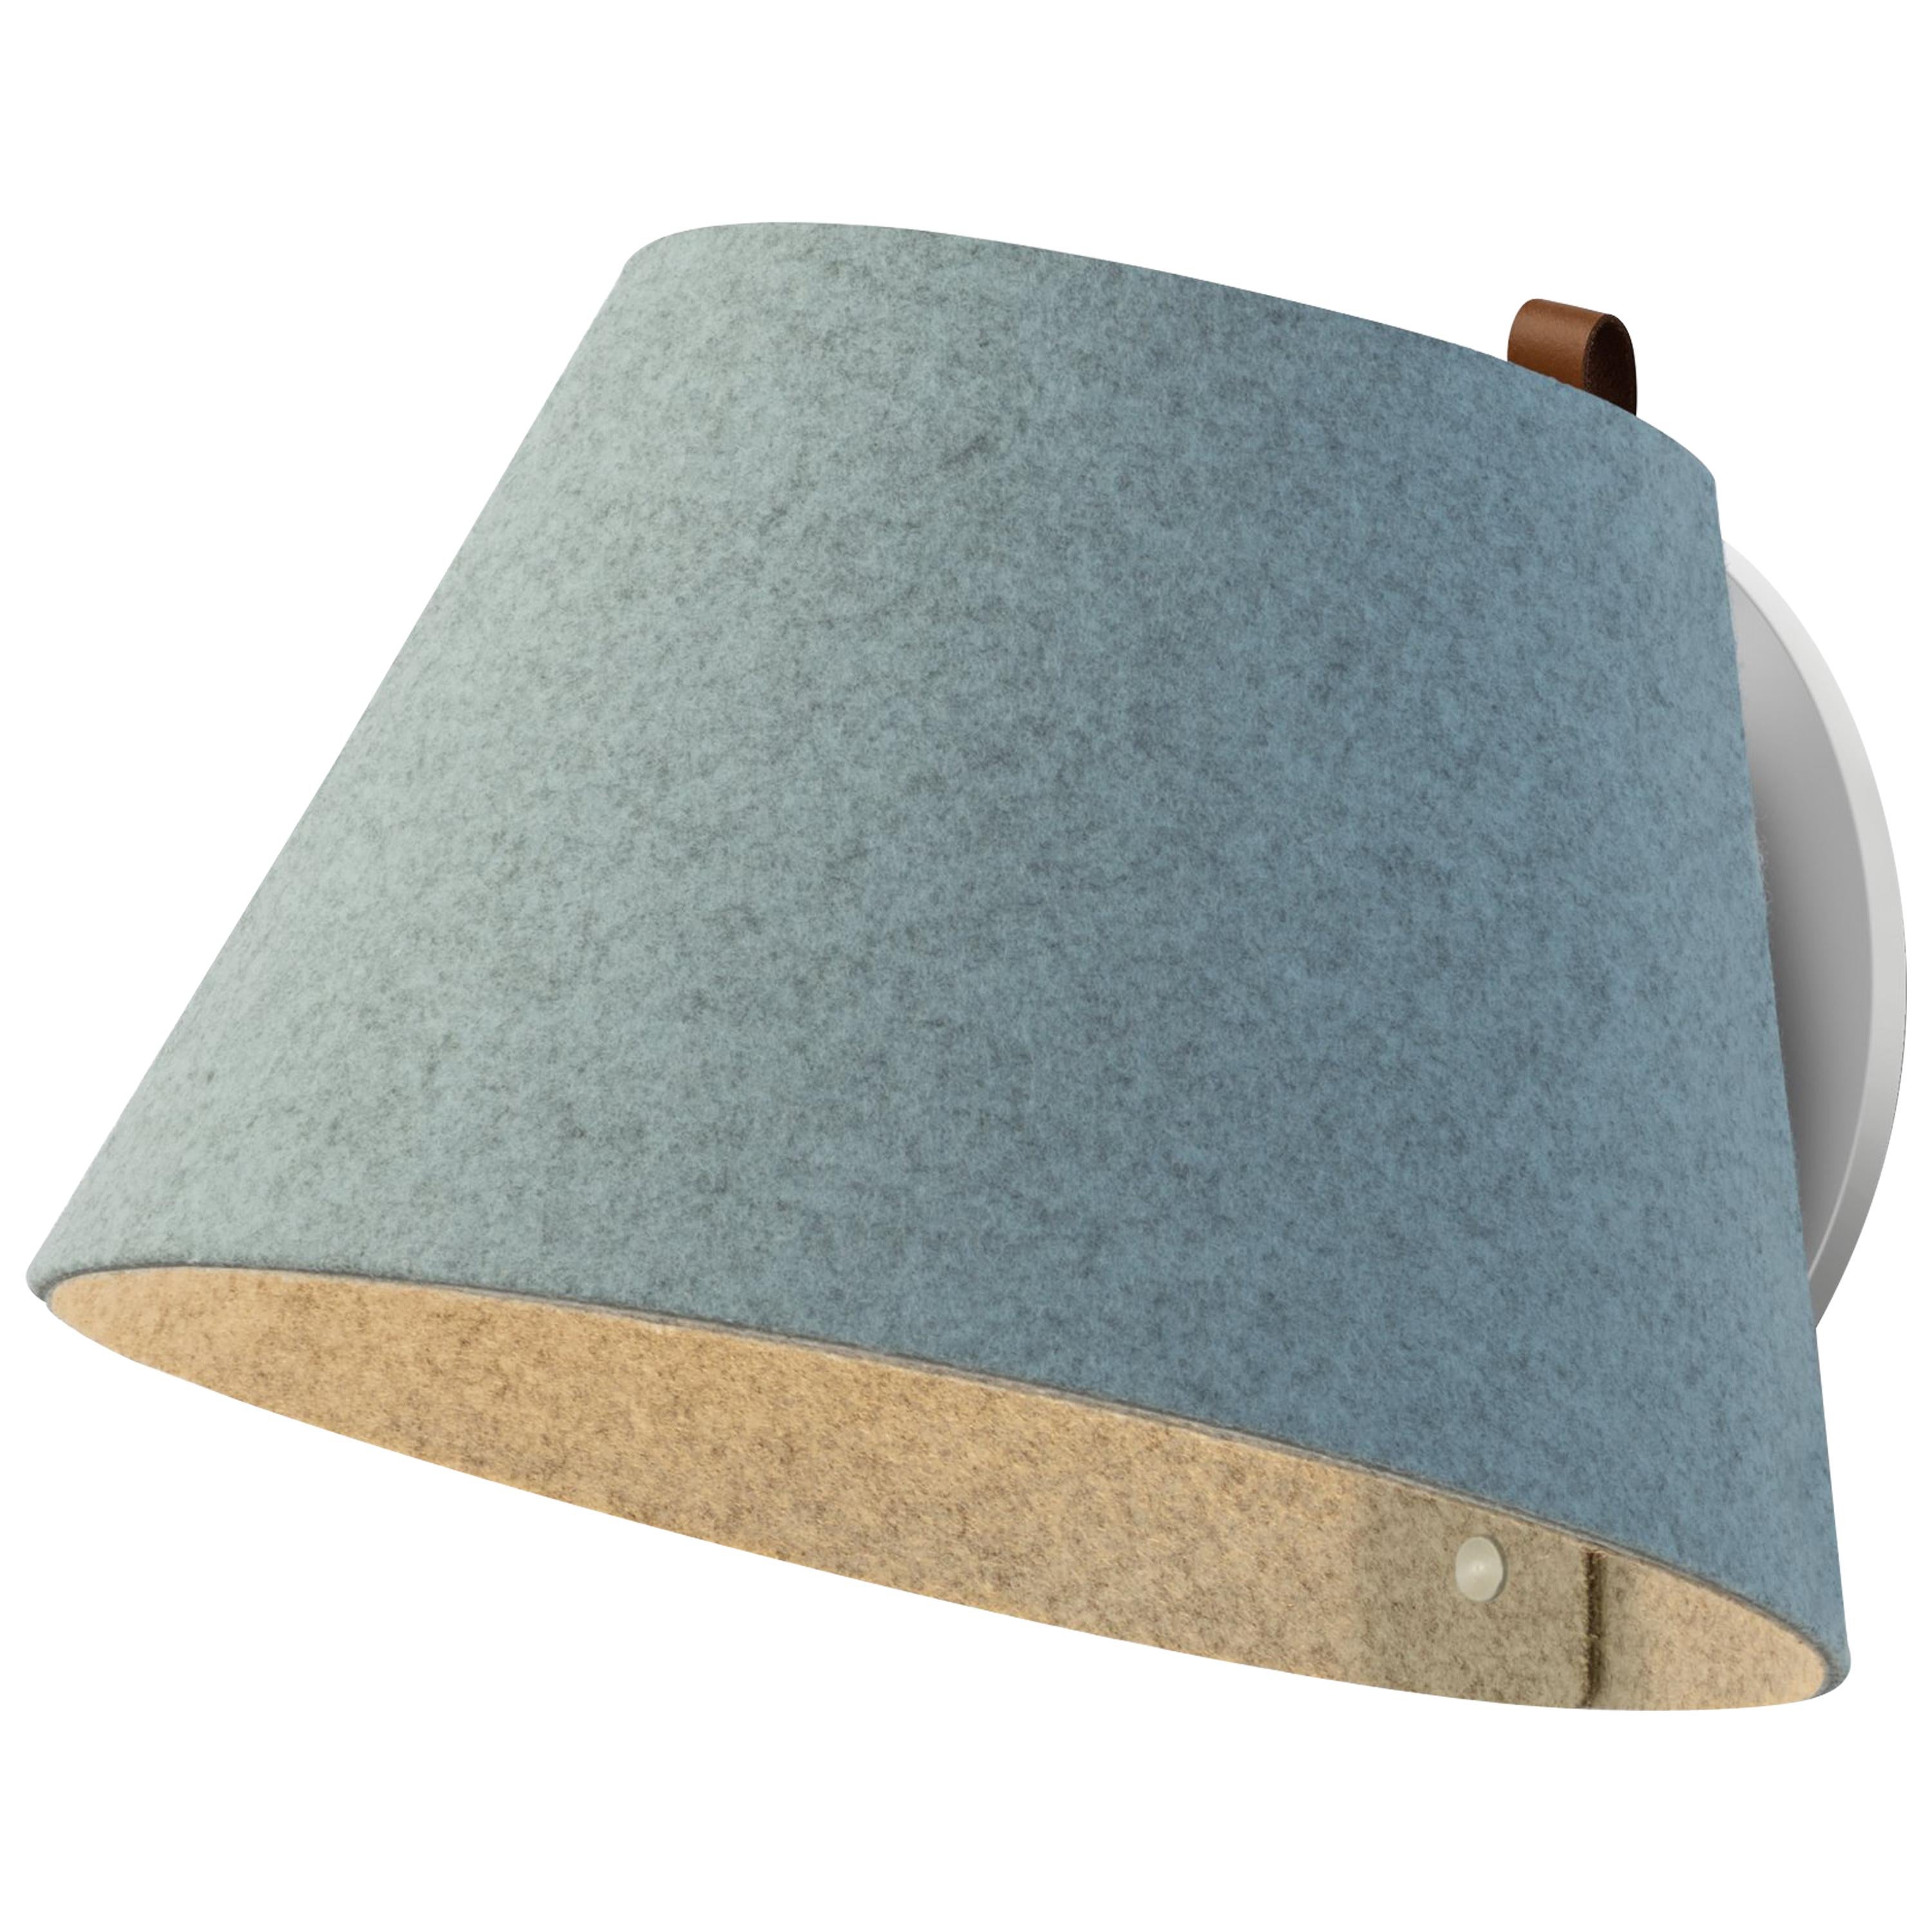 Lana Small Wall Light in Arctic Blue & Grey by Pablo Designs